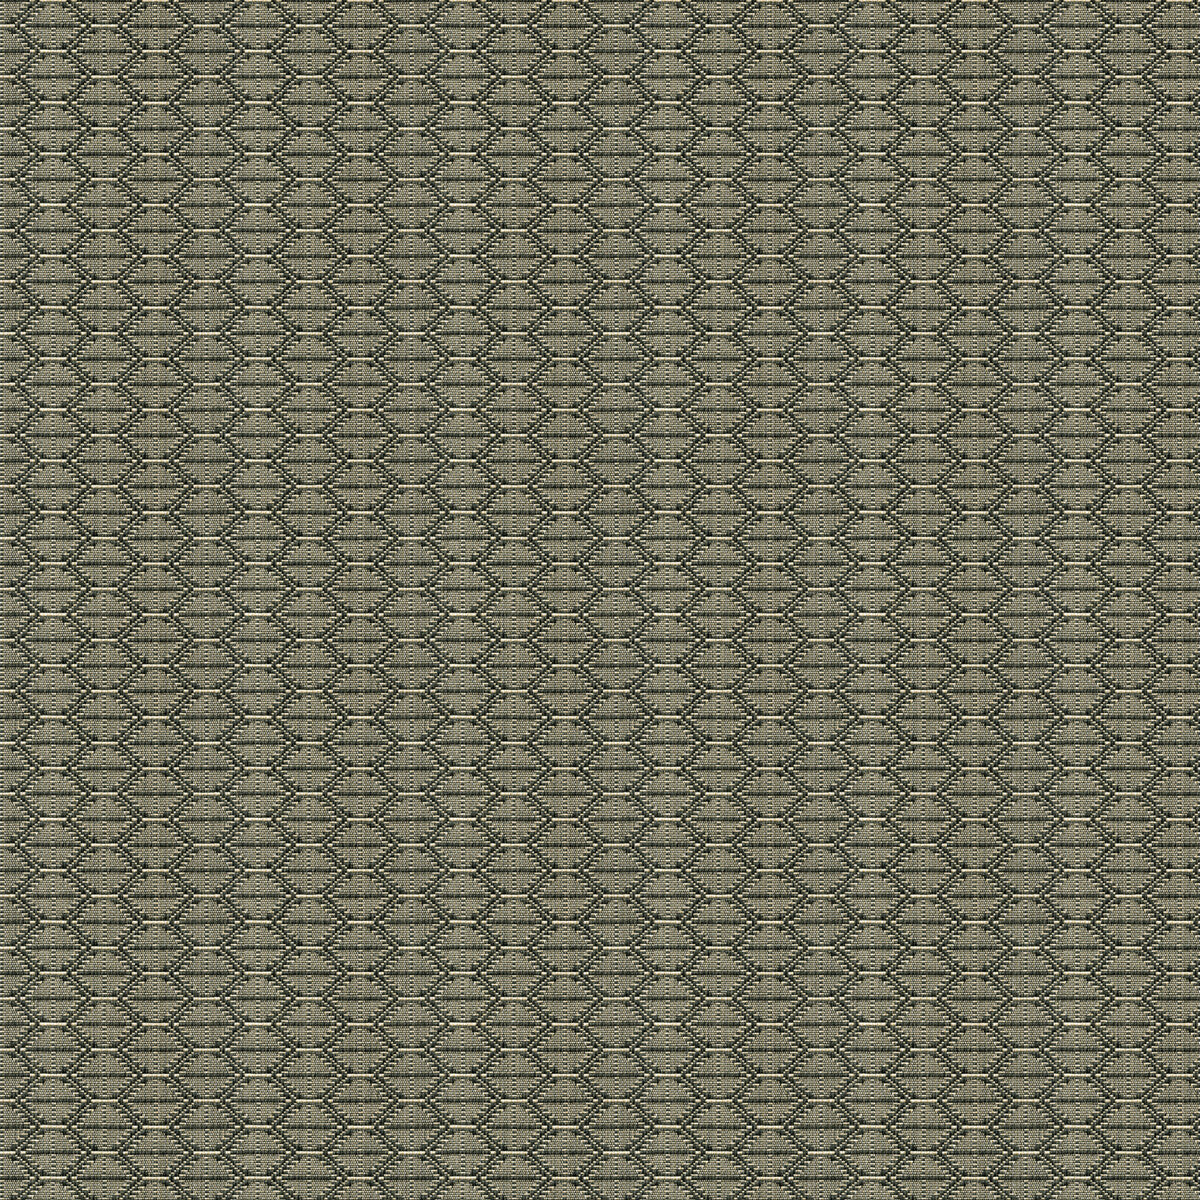 Nzuri fabric in thunder color - pattern 33862.1621.0 - by Kravet Contract in the Tanzania J Banks collection